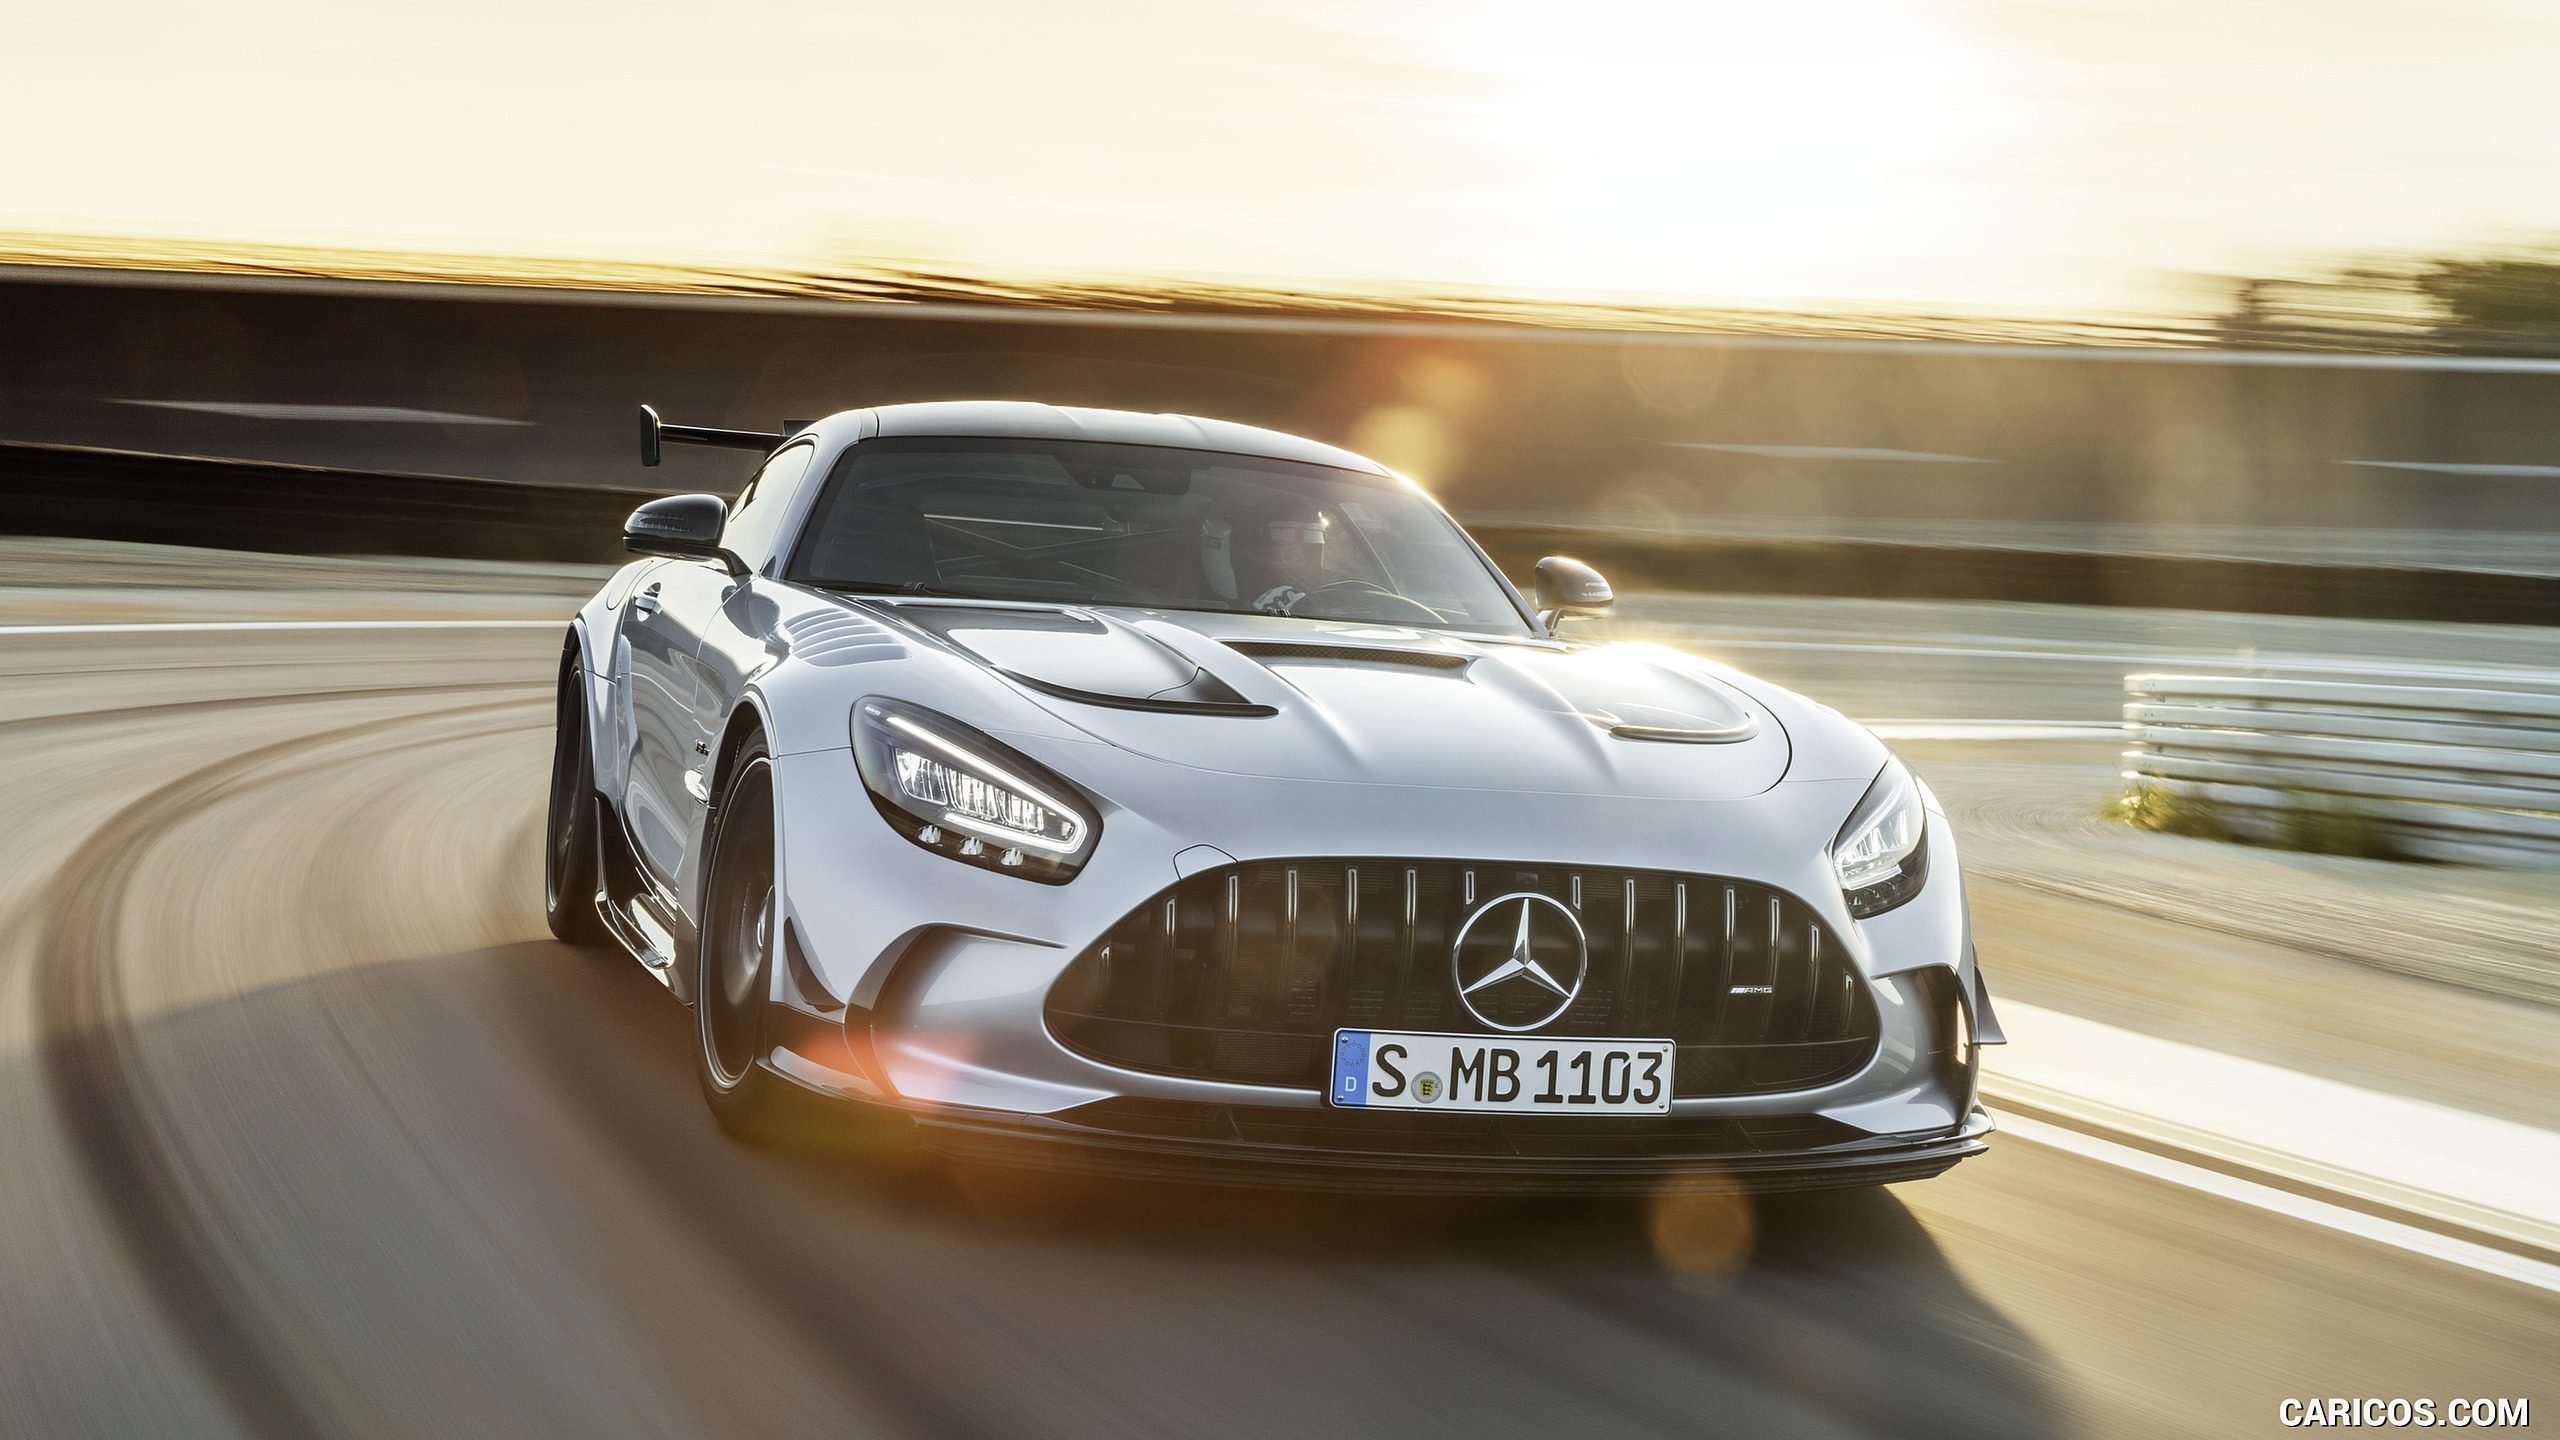 2021 Mercedes-AMG GT Black Series (Color: High Tech Silver) - Front, #5 of 215